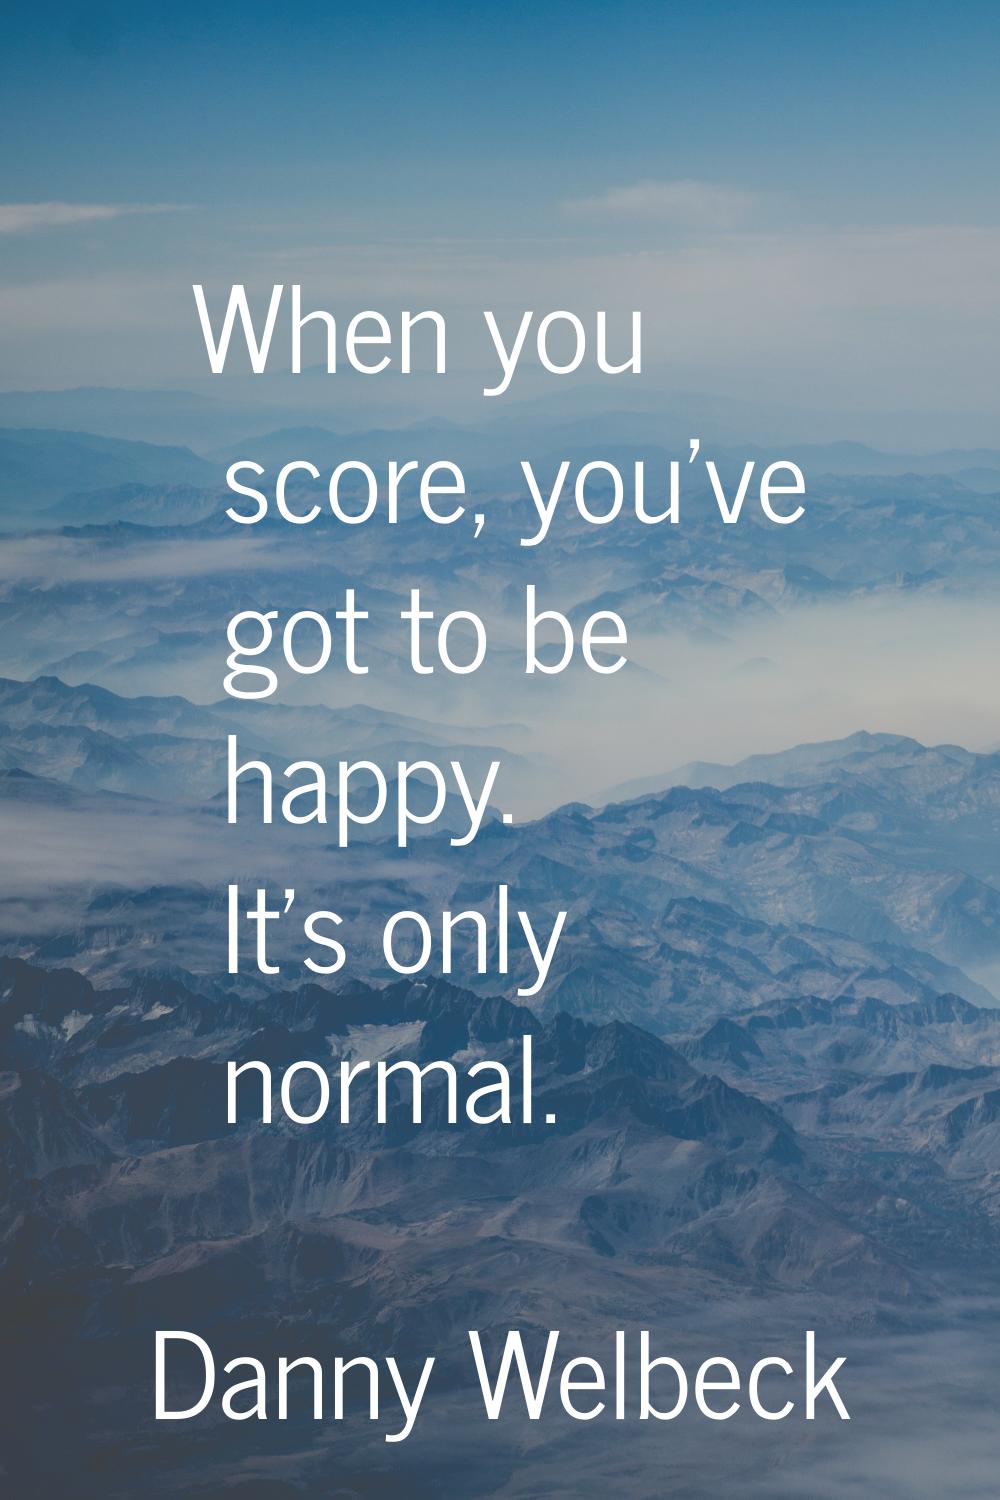 When you score, you've got to be happy. It's only normal.